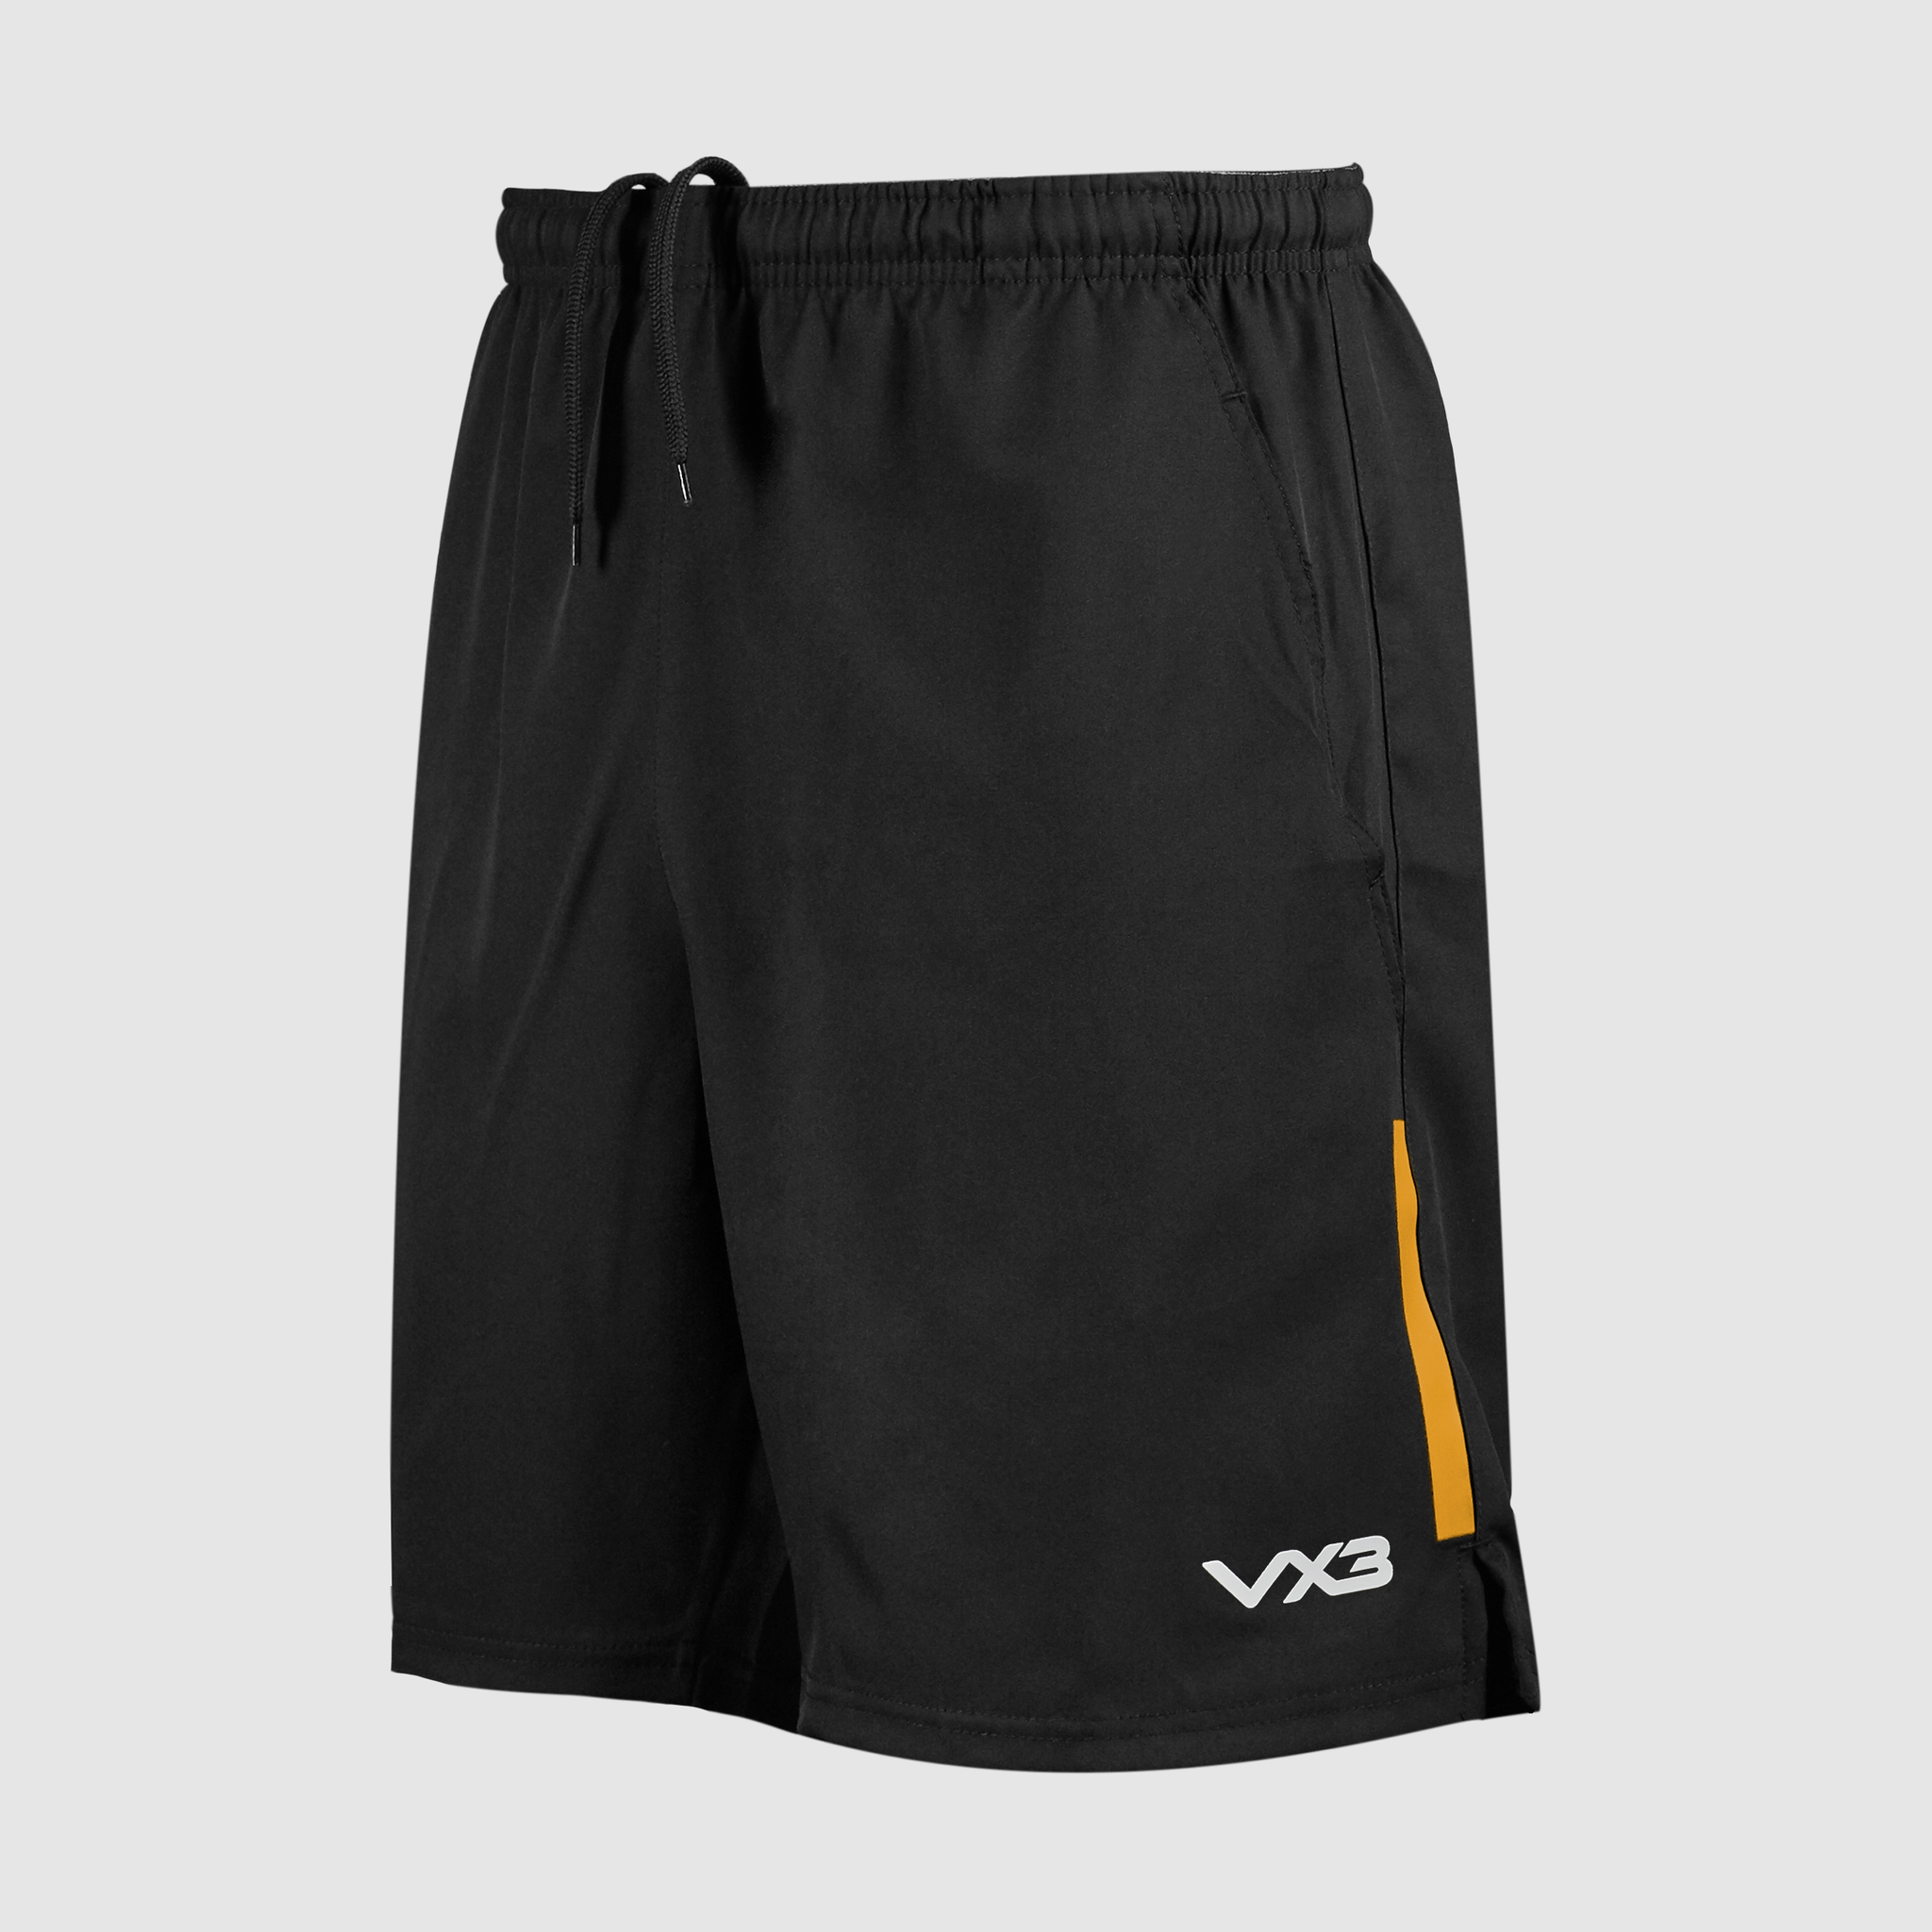 Fortis Youth Travel Shorts Black/Amber